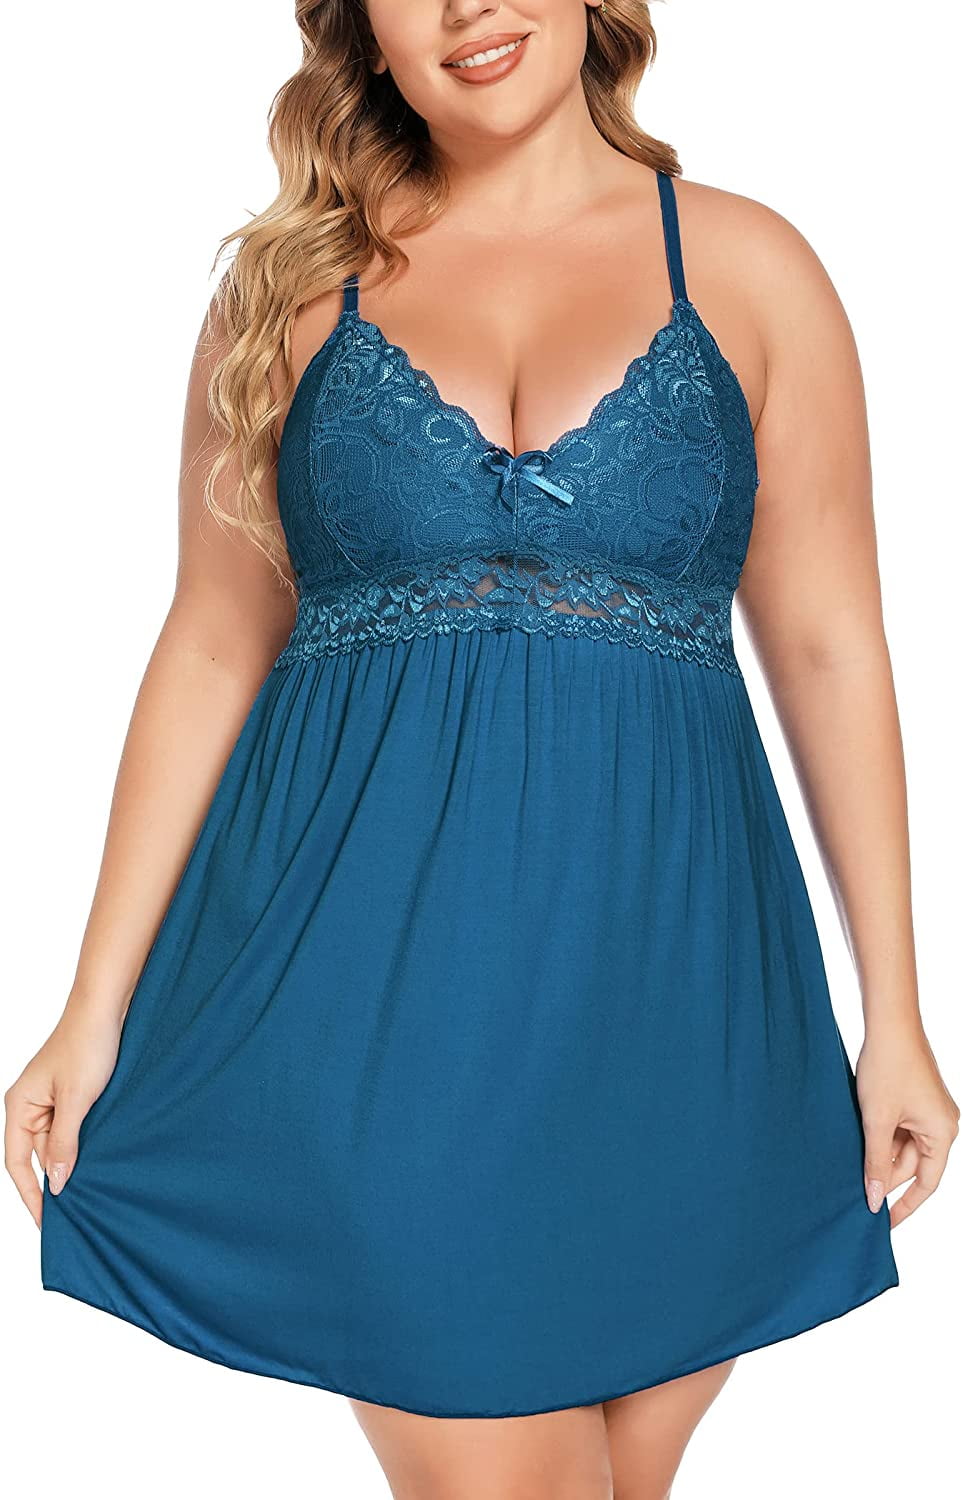 Ababoon Plus Size Lingerie for Women Lace Modal Chemises Nightgown V-Neck  Full Slip Babydoll Sleepwear Size 16-24 Plus